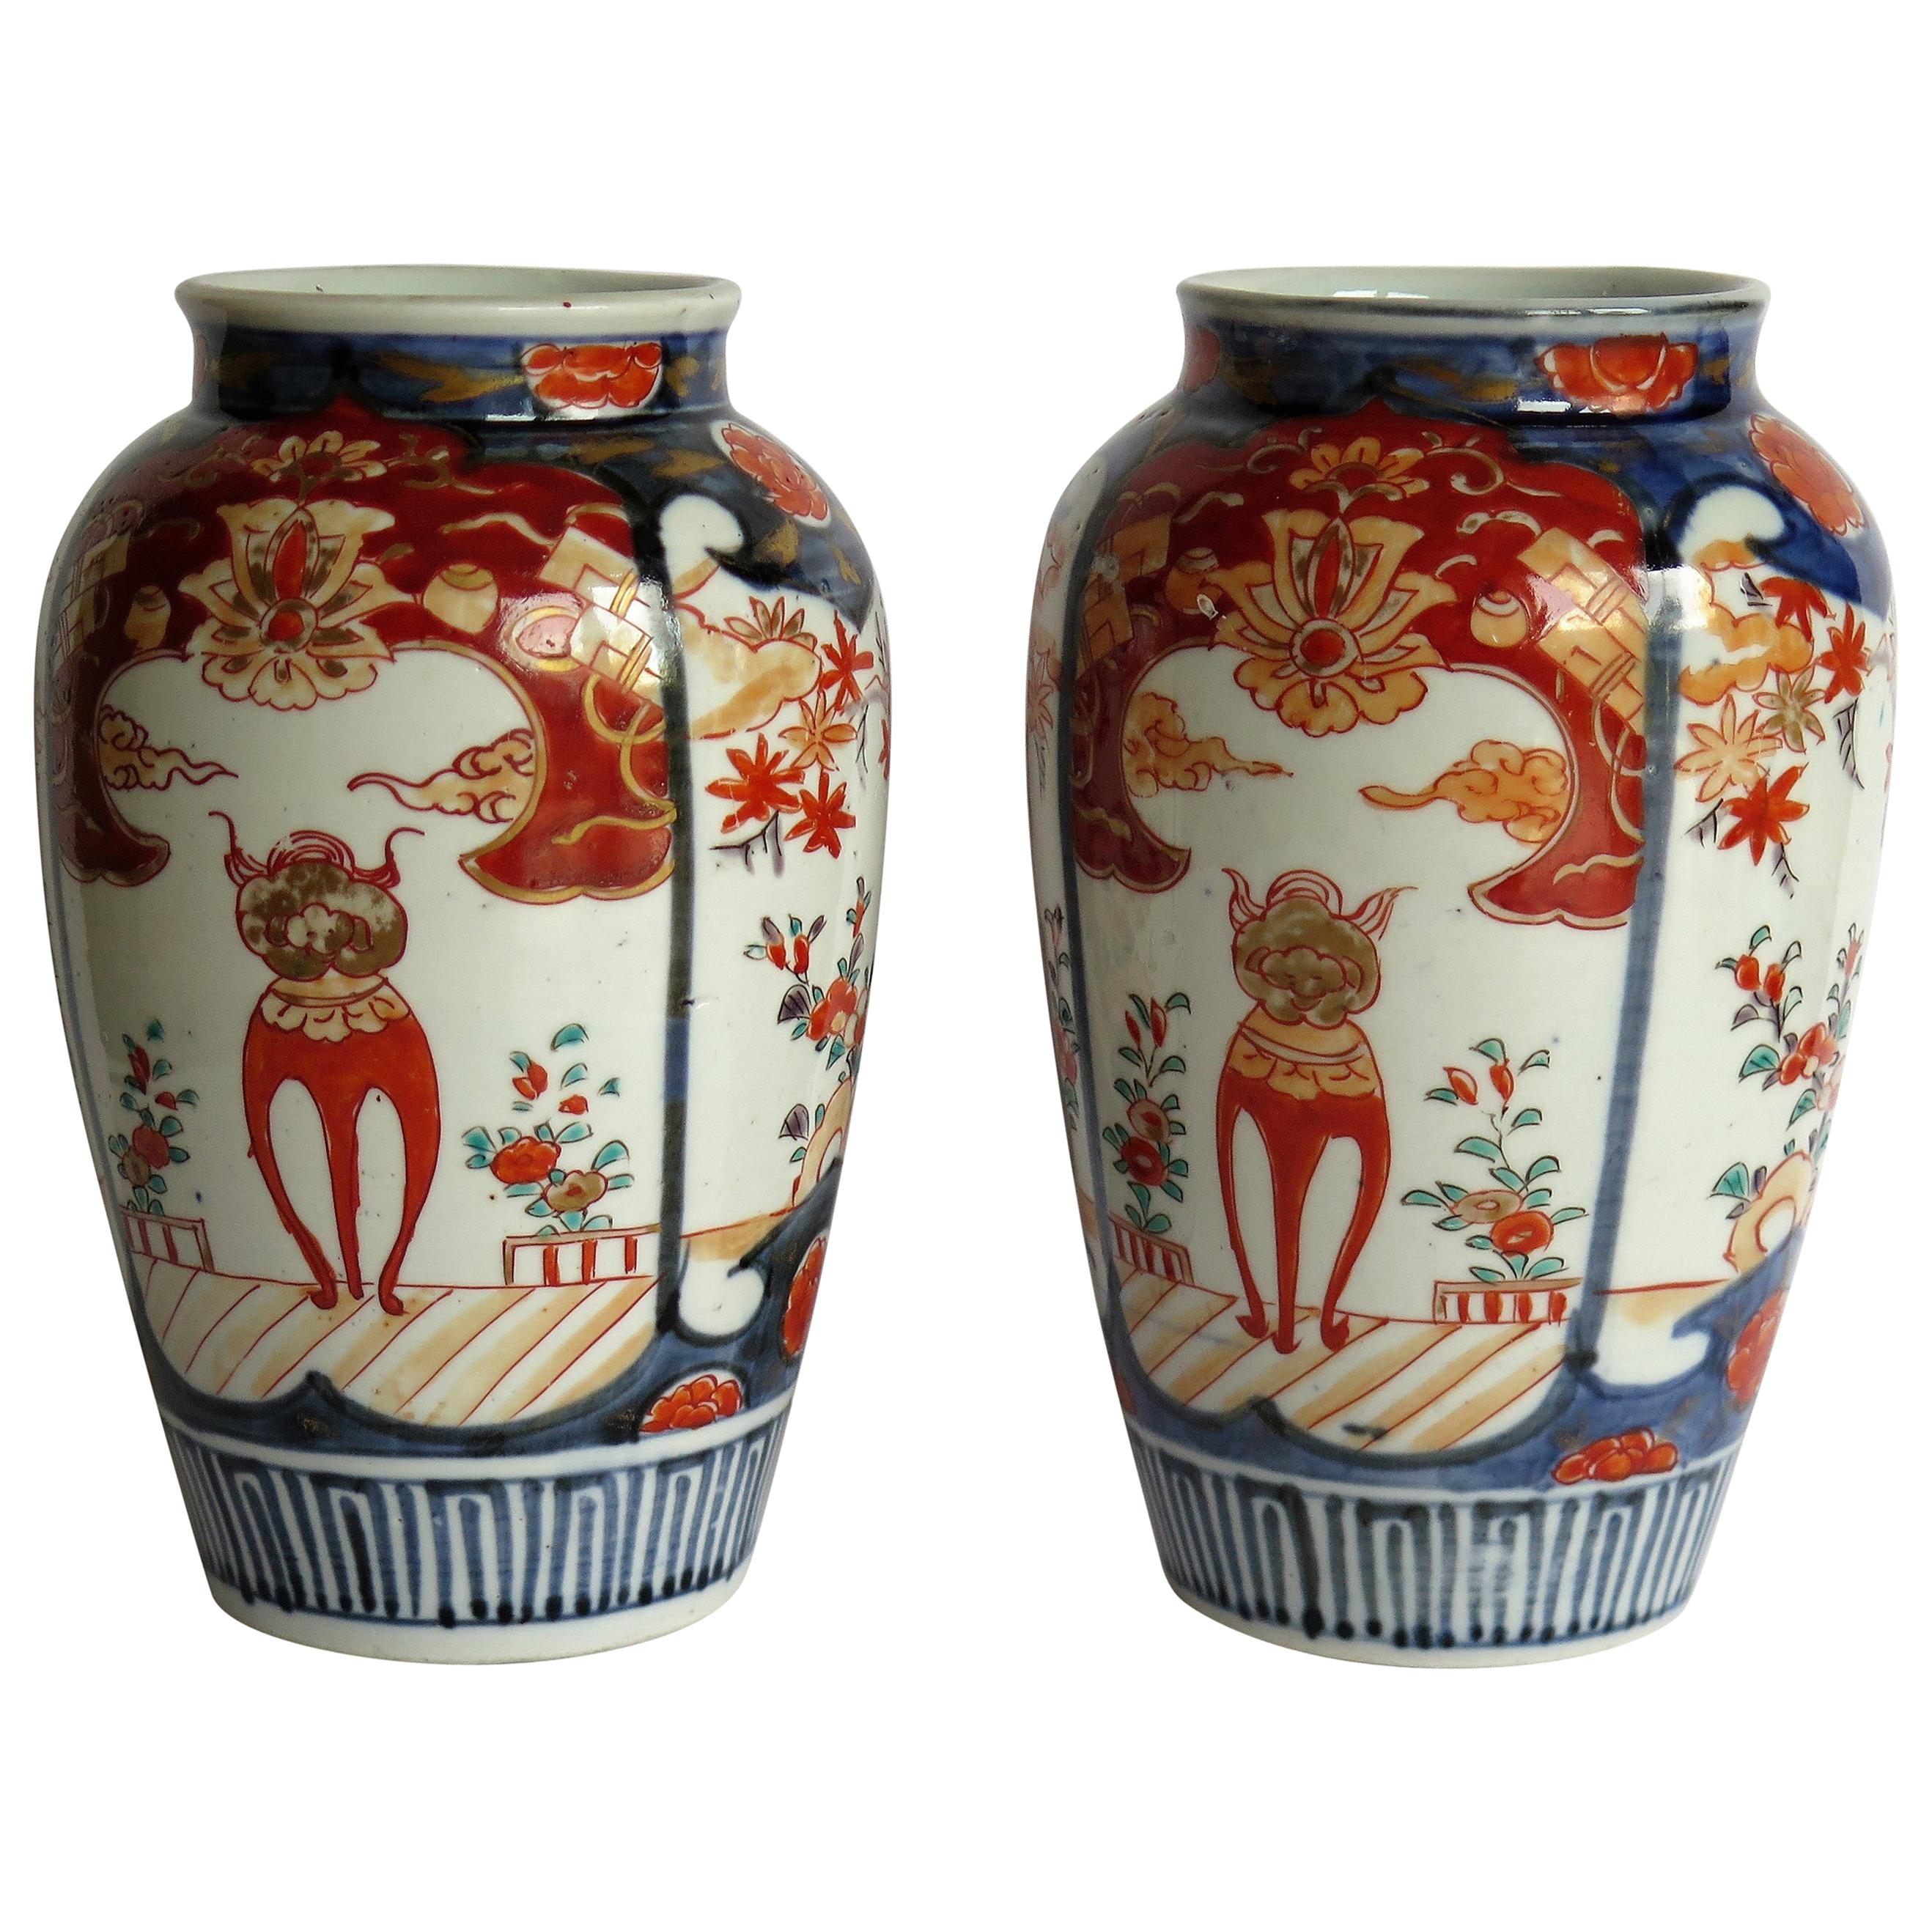 Pair of Japanese Porcelain Vases Hand Painted, Meiji Period, circa 1880